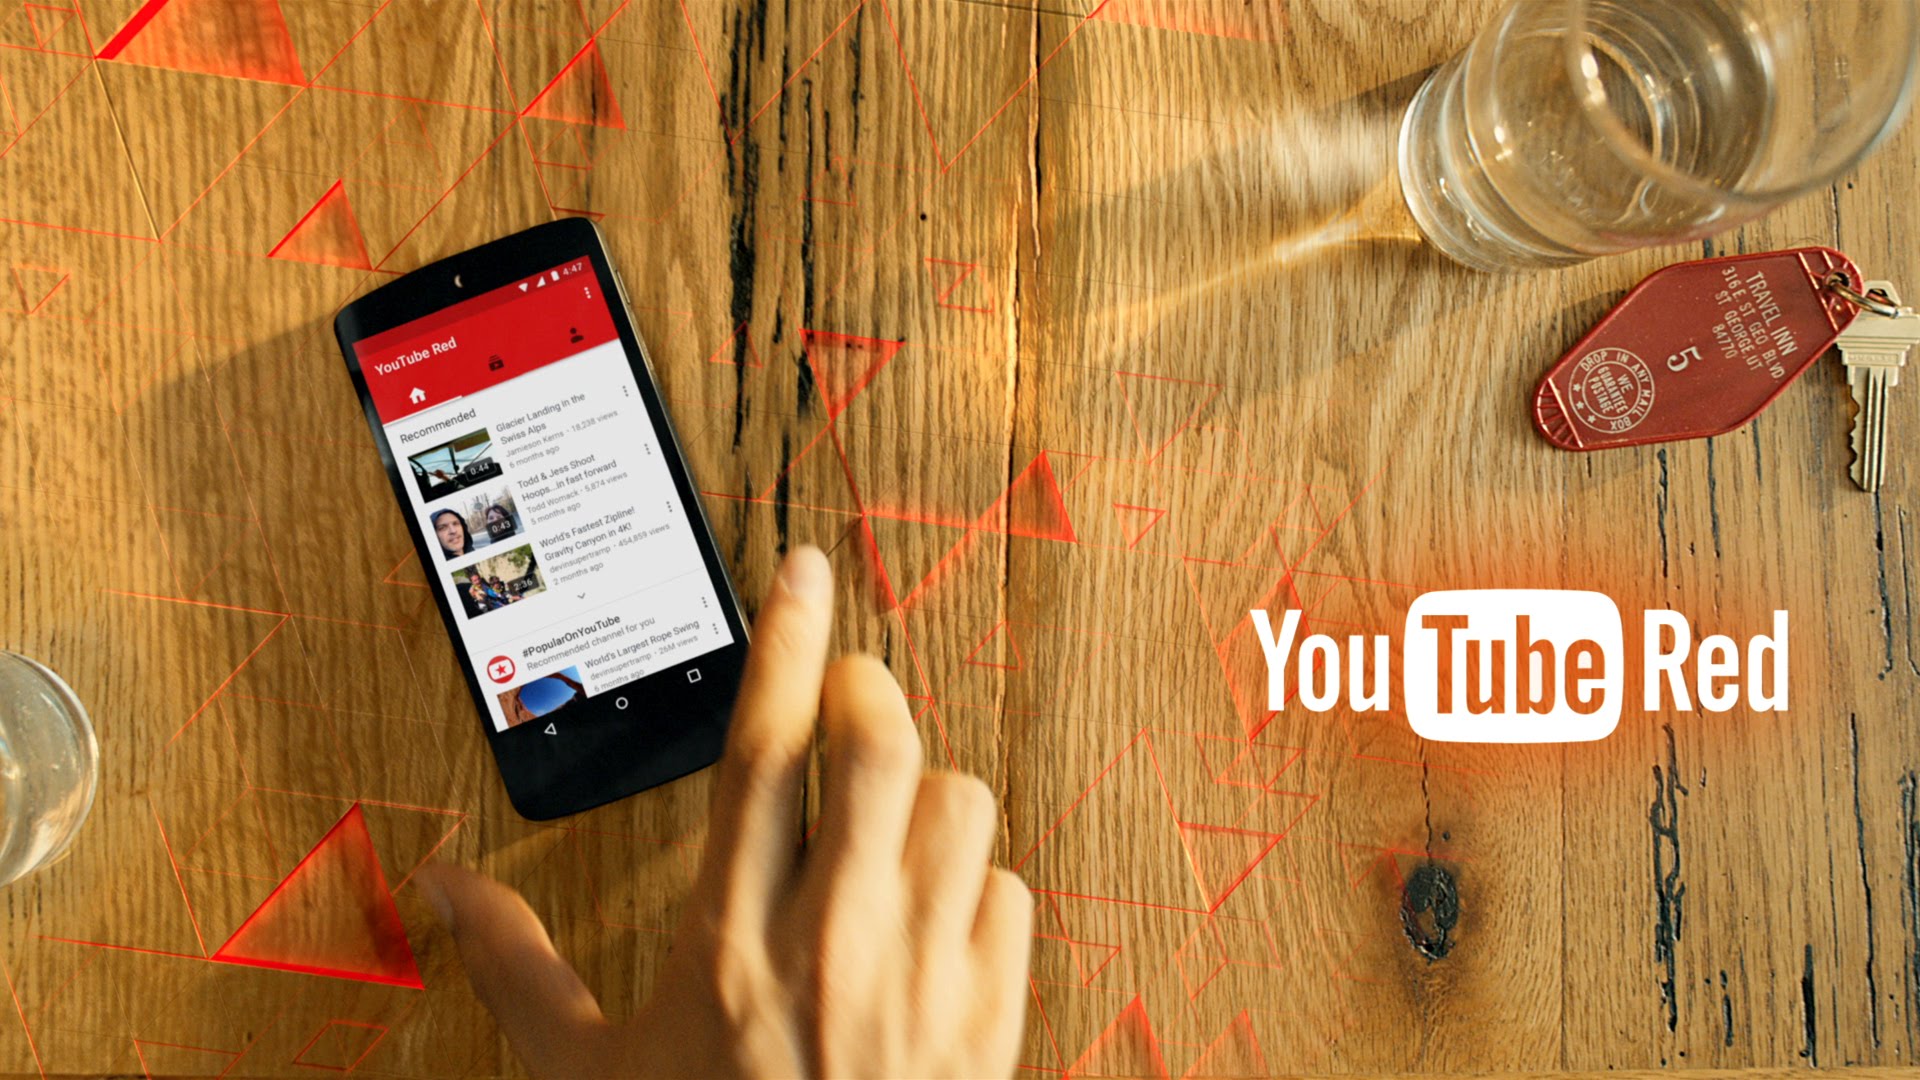 YouTube Red in the Top 5 Grossing iOS Apps